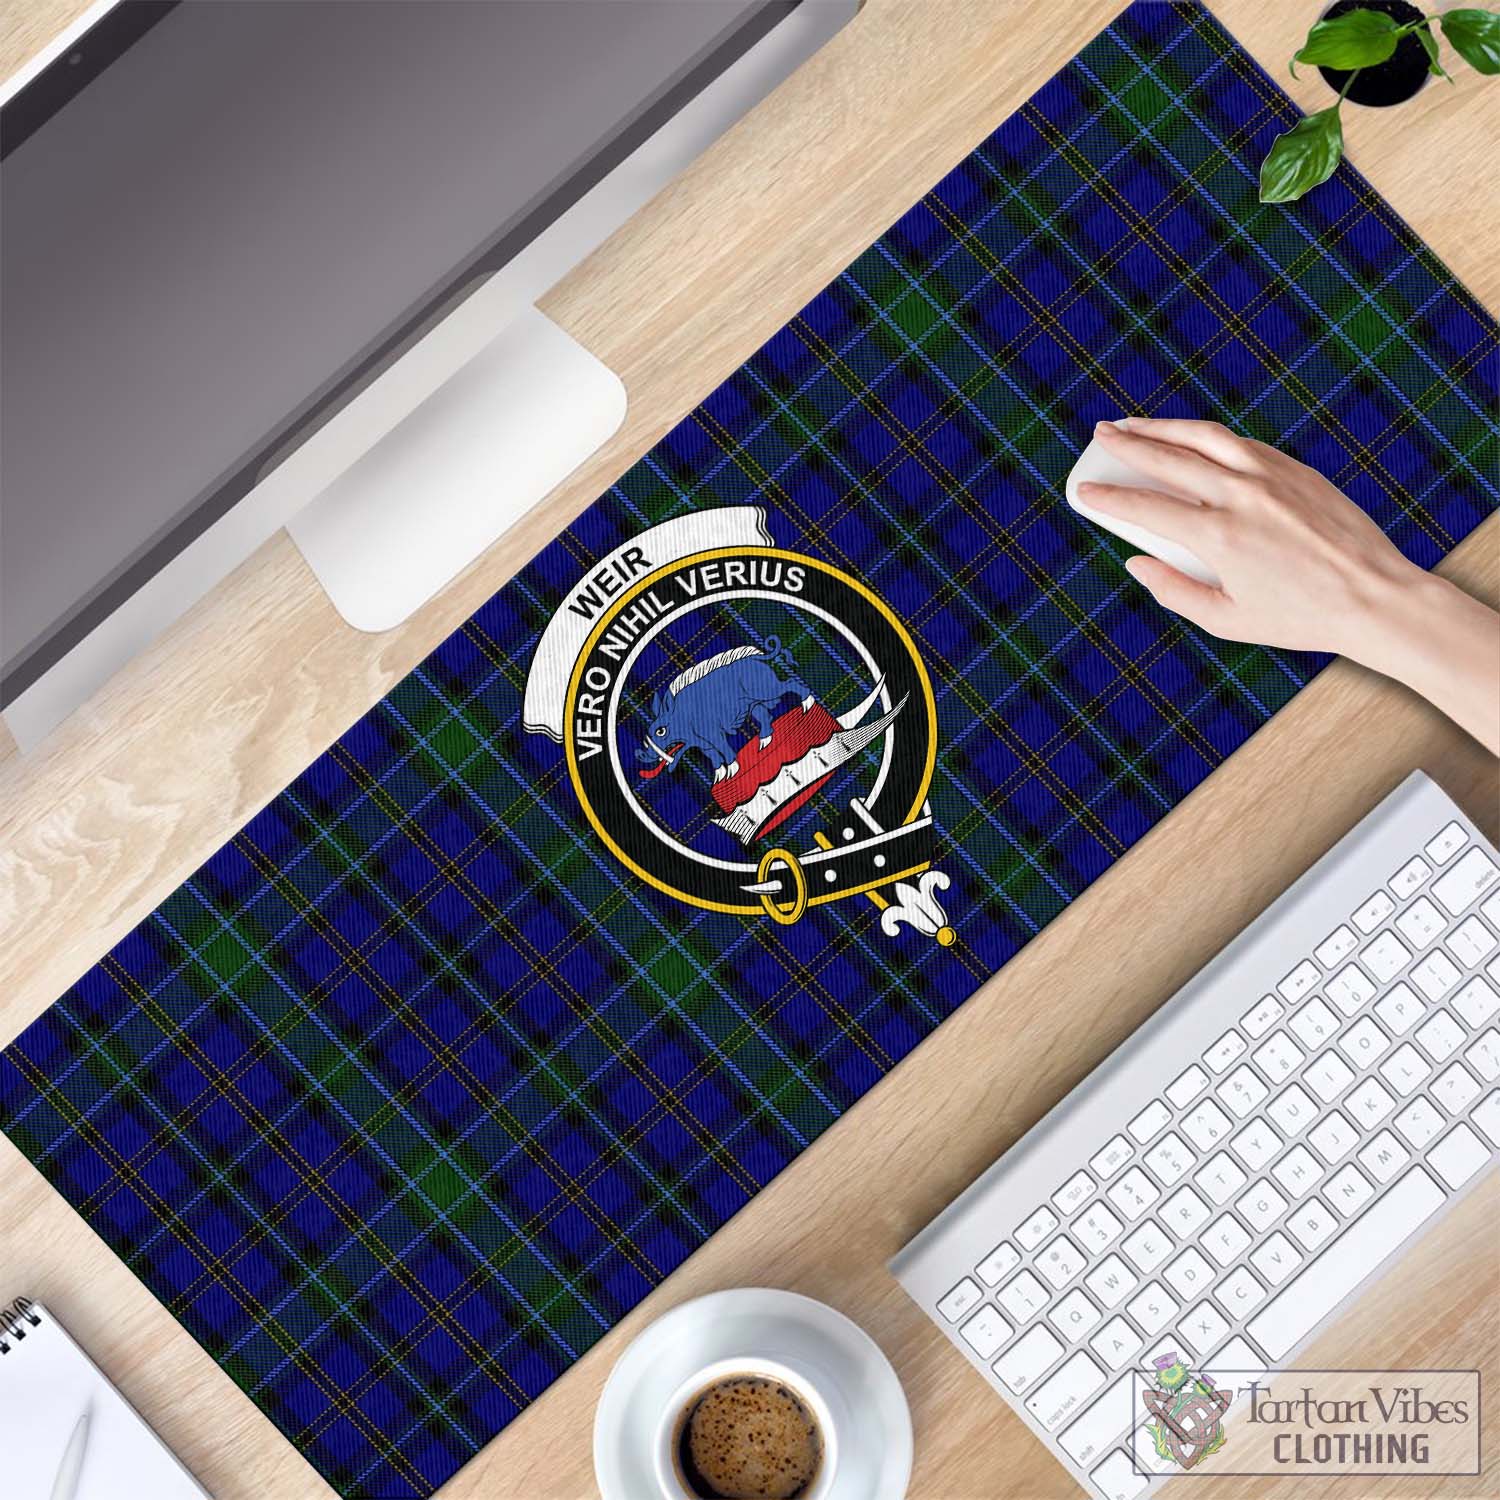 Tartan Vibes Clothing Weir Tartan Mouse Pad with Family Crest